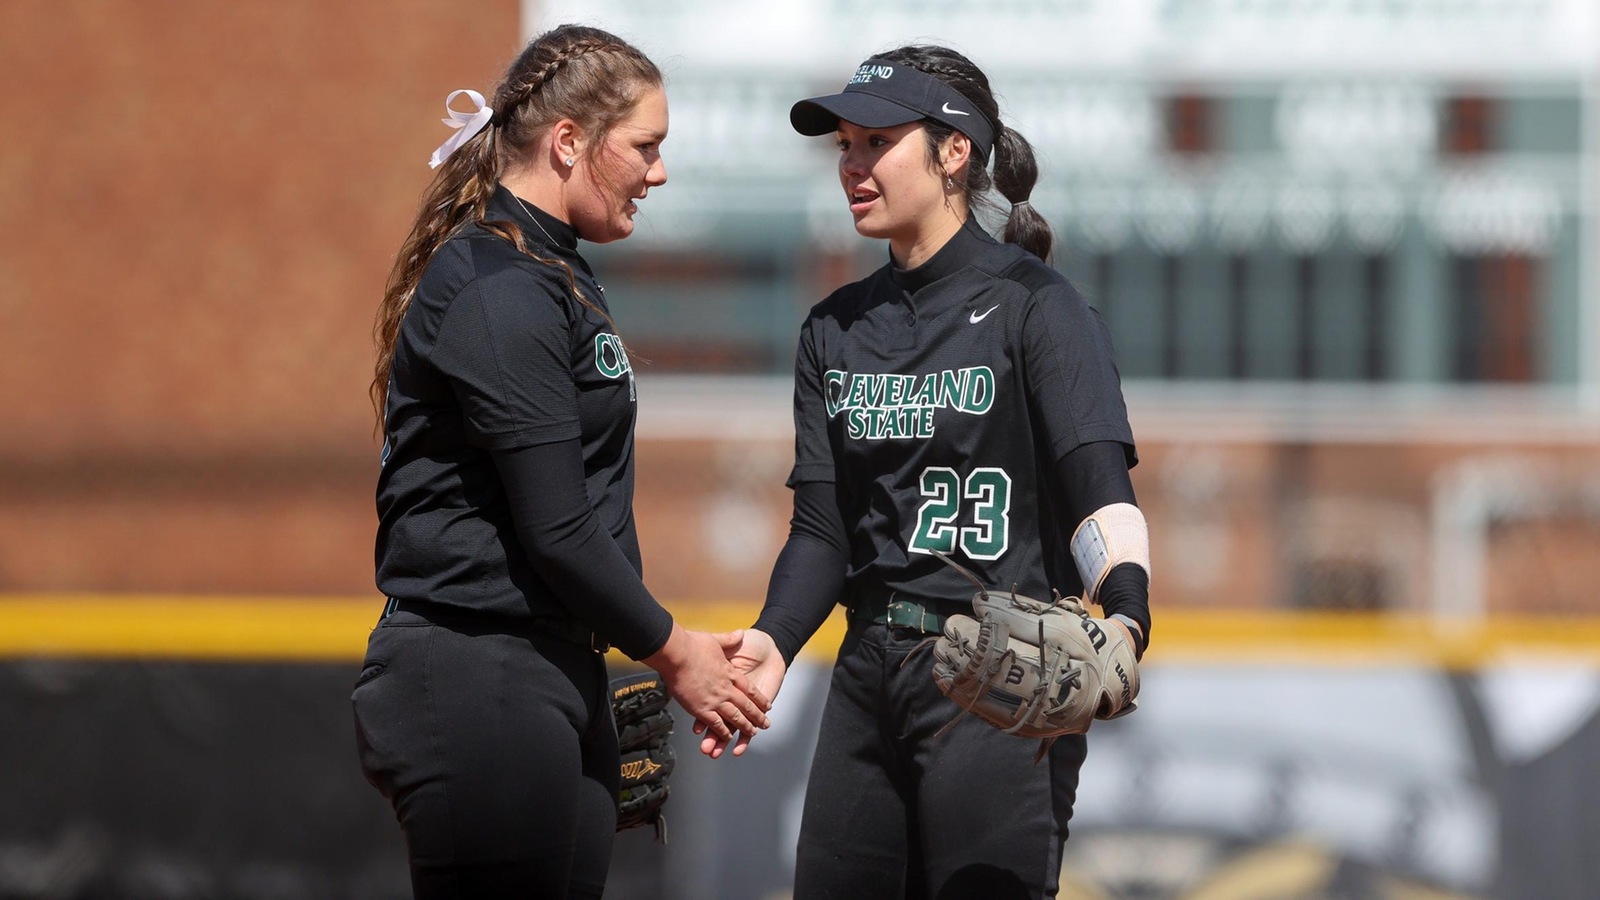 Softball heads to RMU for HL showdown against the first-place Colonials